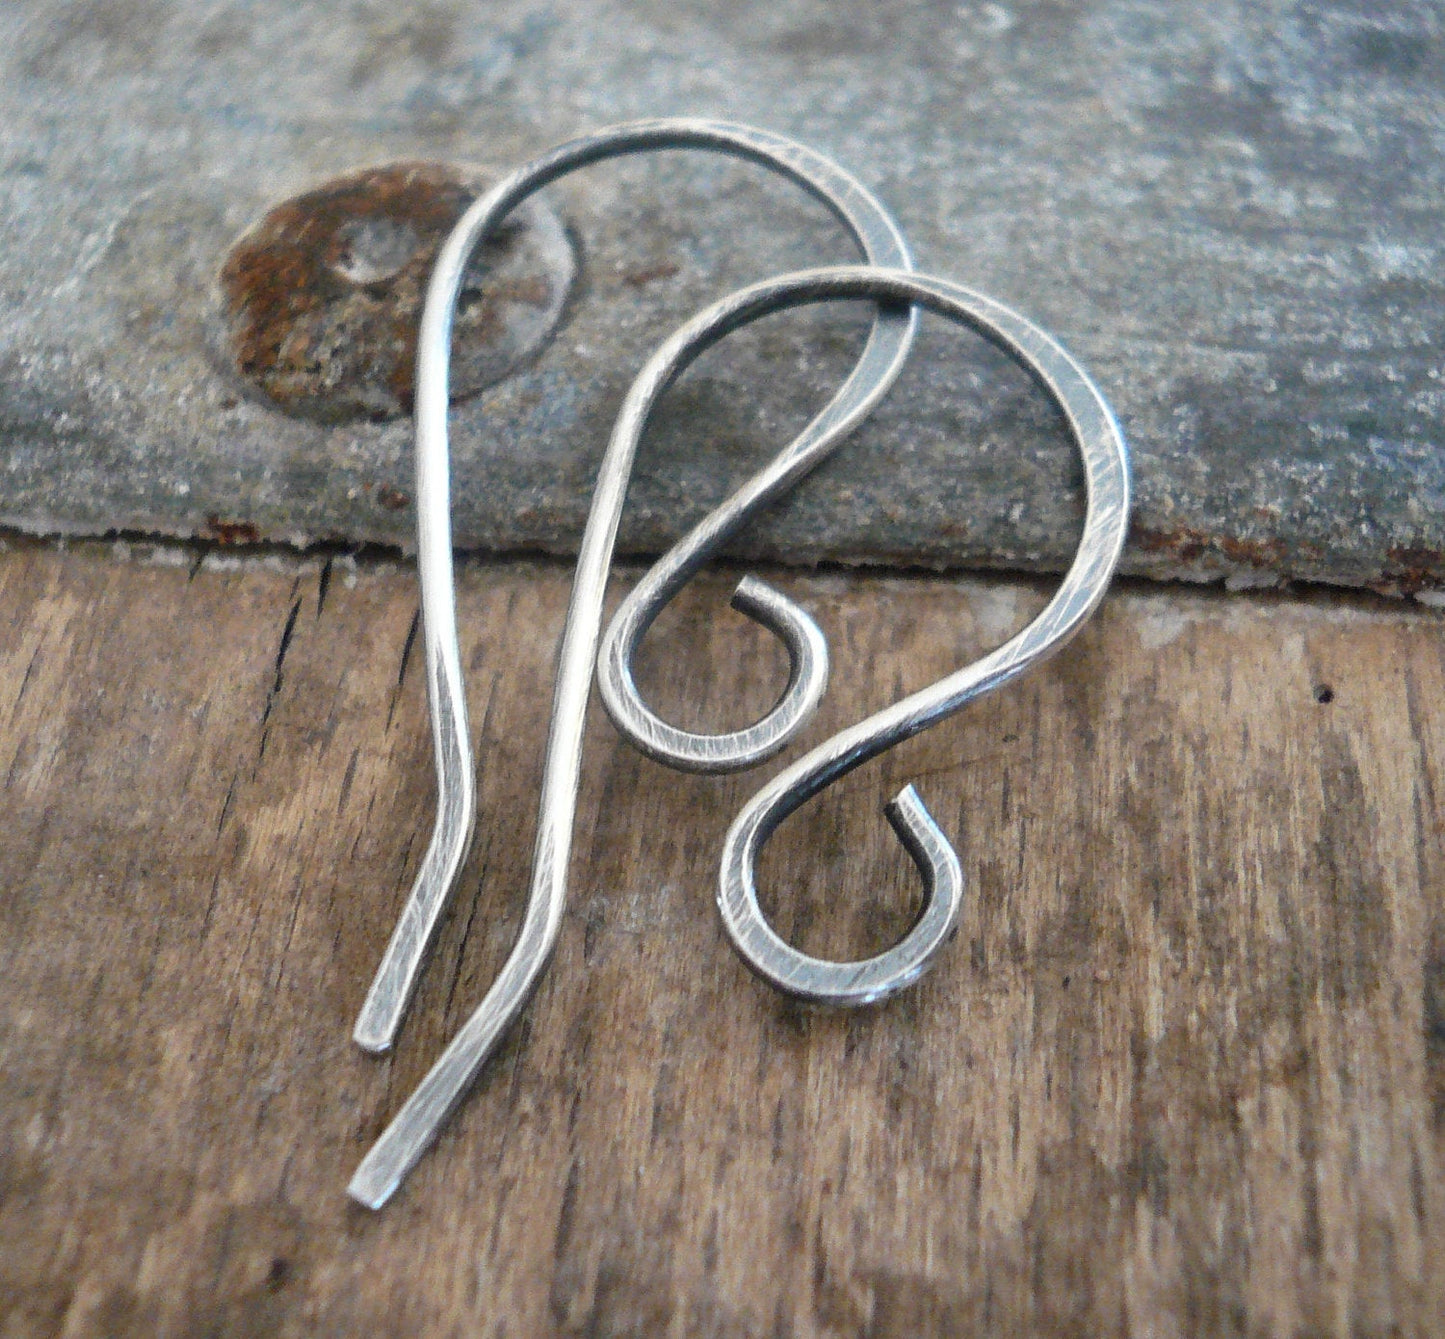 Solitaire Sterling Silver Earwires - Handmade. Oxidized and polished. Made to Order